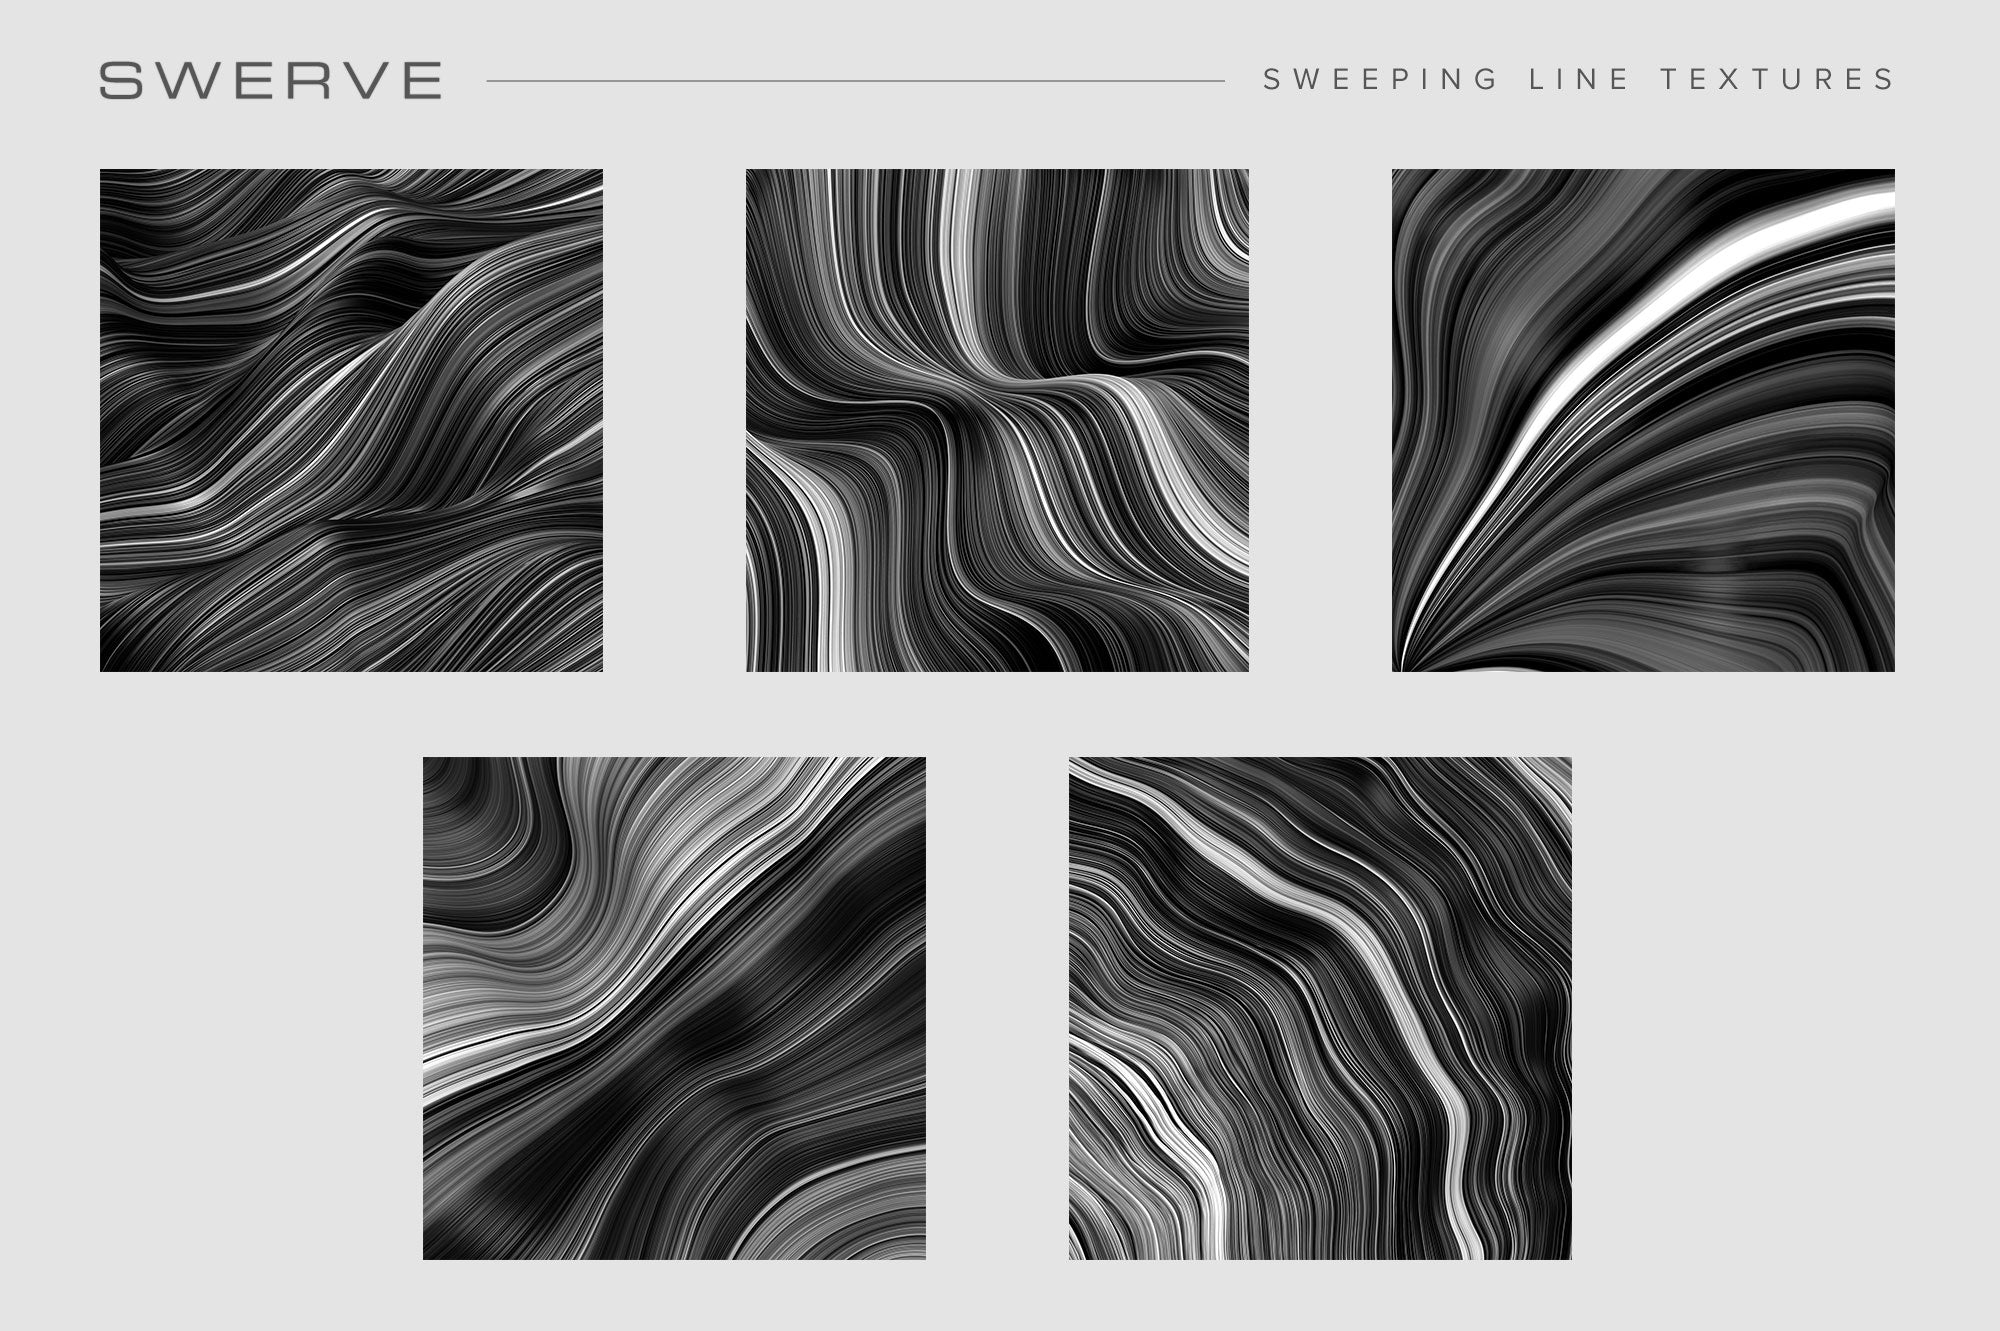 Swerve: Sweeping Line Textures